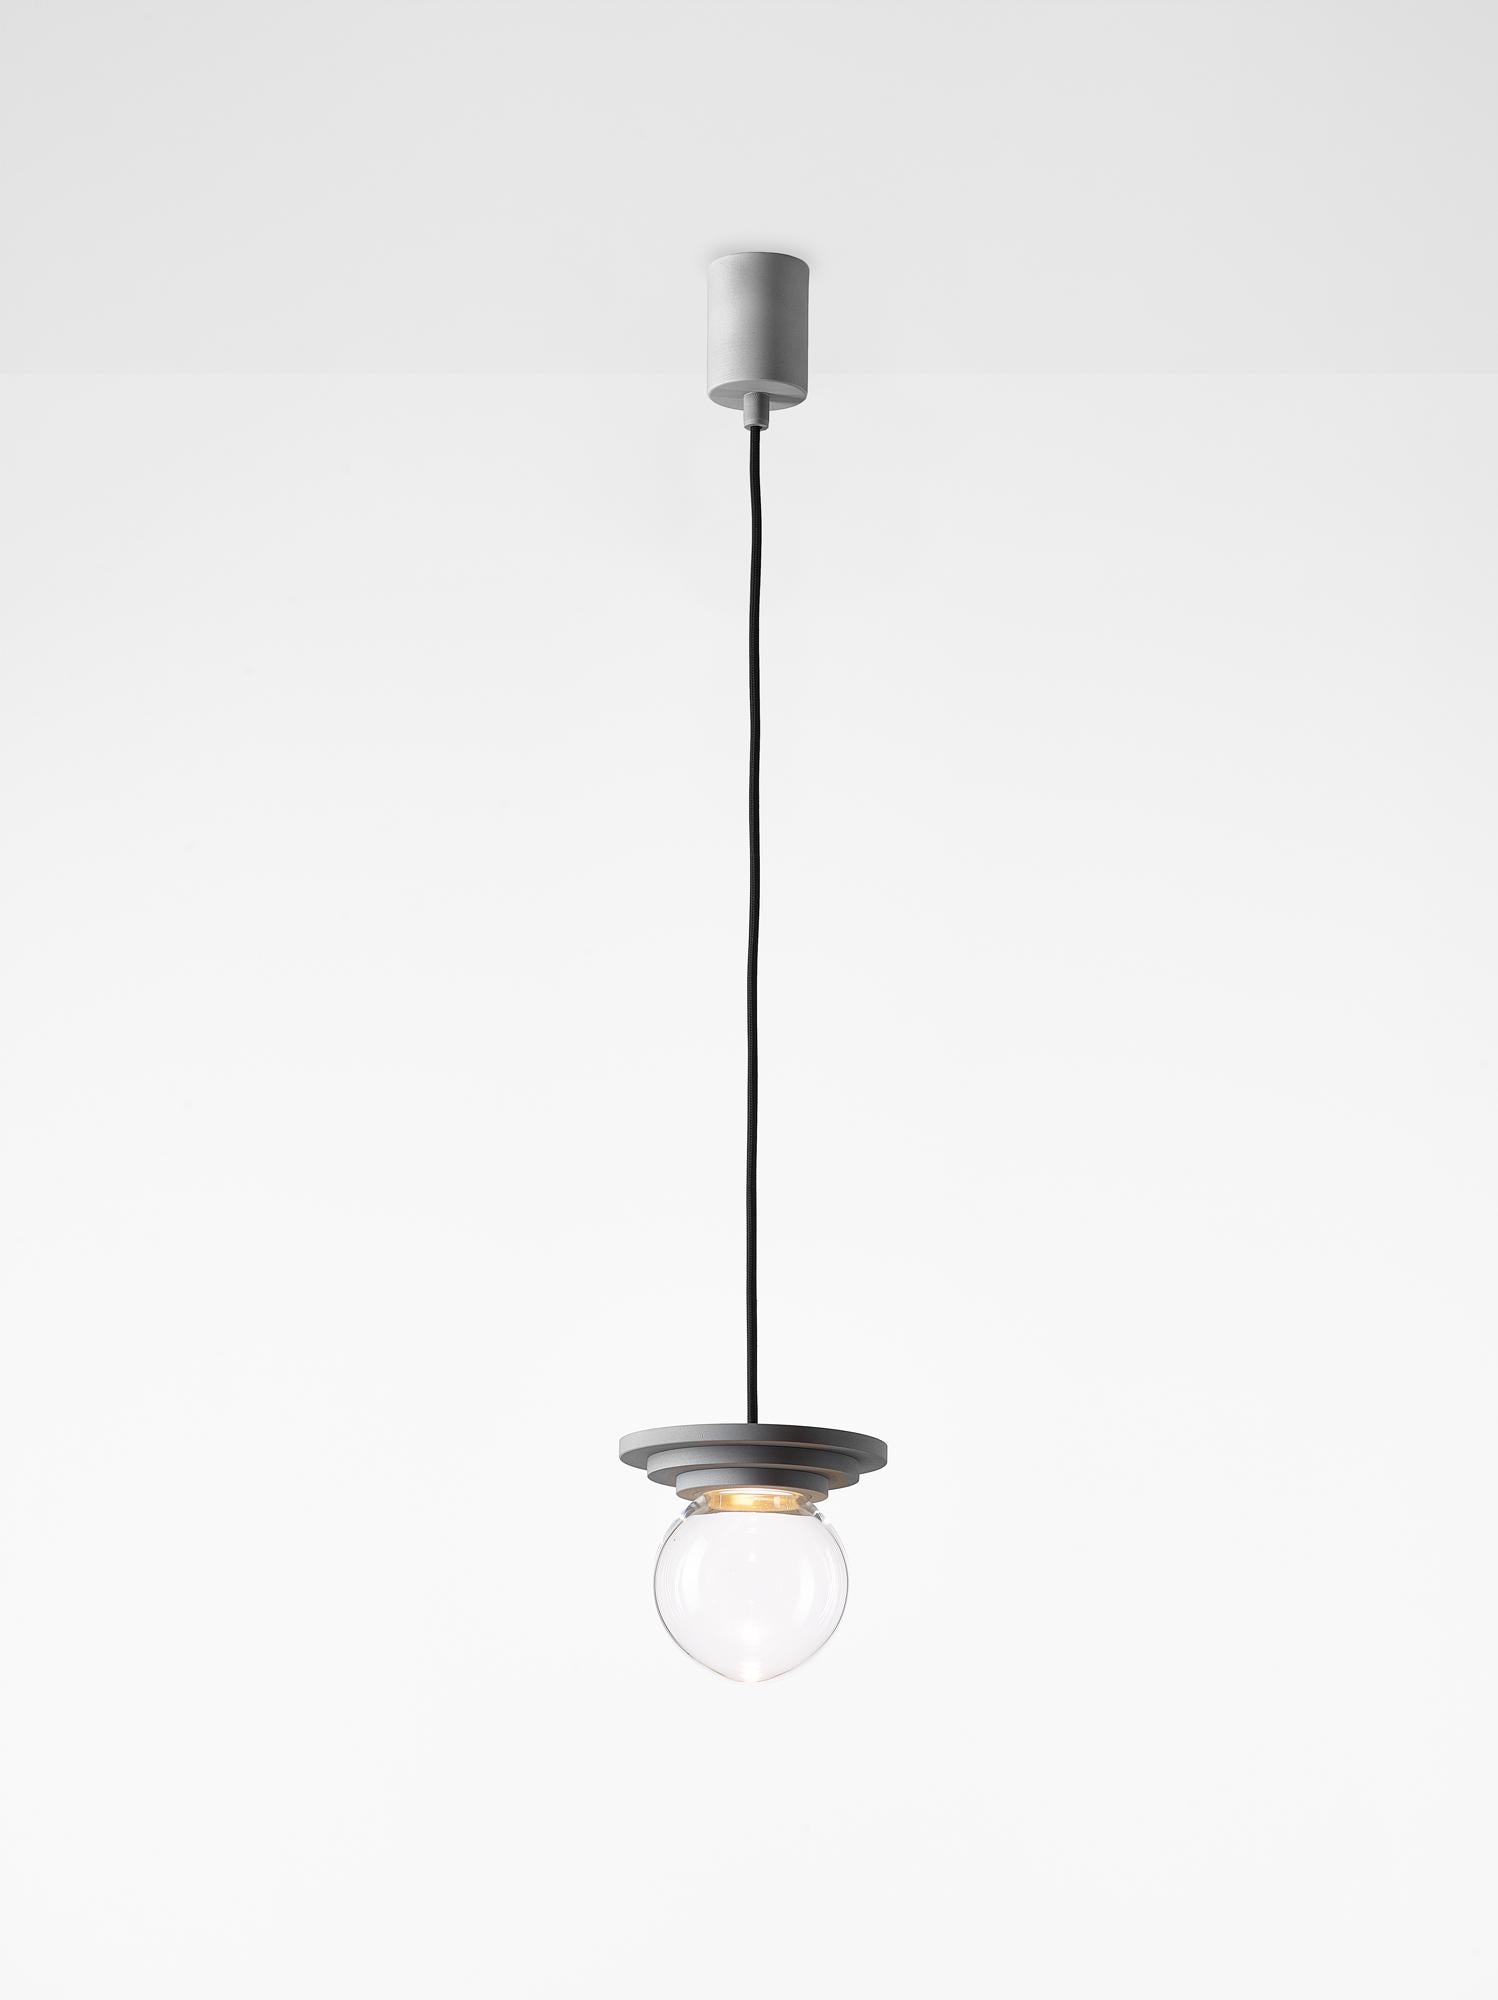 Set of 2 silver and clear stratos mini ball pendant light by Dechem Studio
Dimensions: D 12 x H 14 cm
Materials: Aluminum, Glass.
Also available: Different colours available.

Different shapes of capsules and spheres contrast with anodized